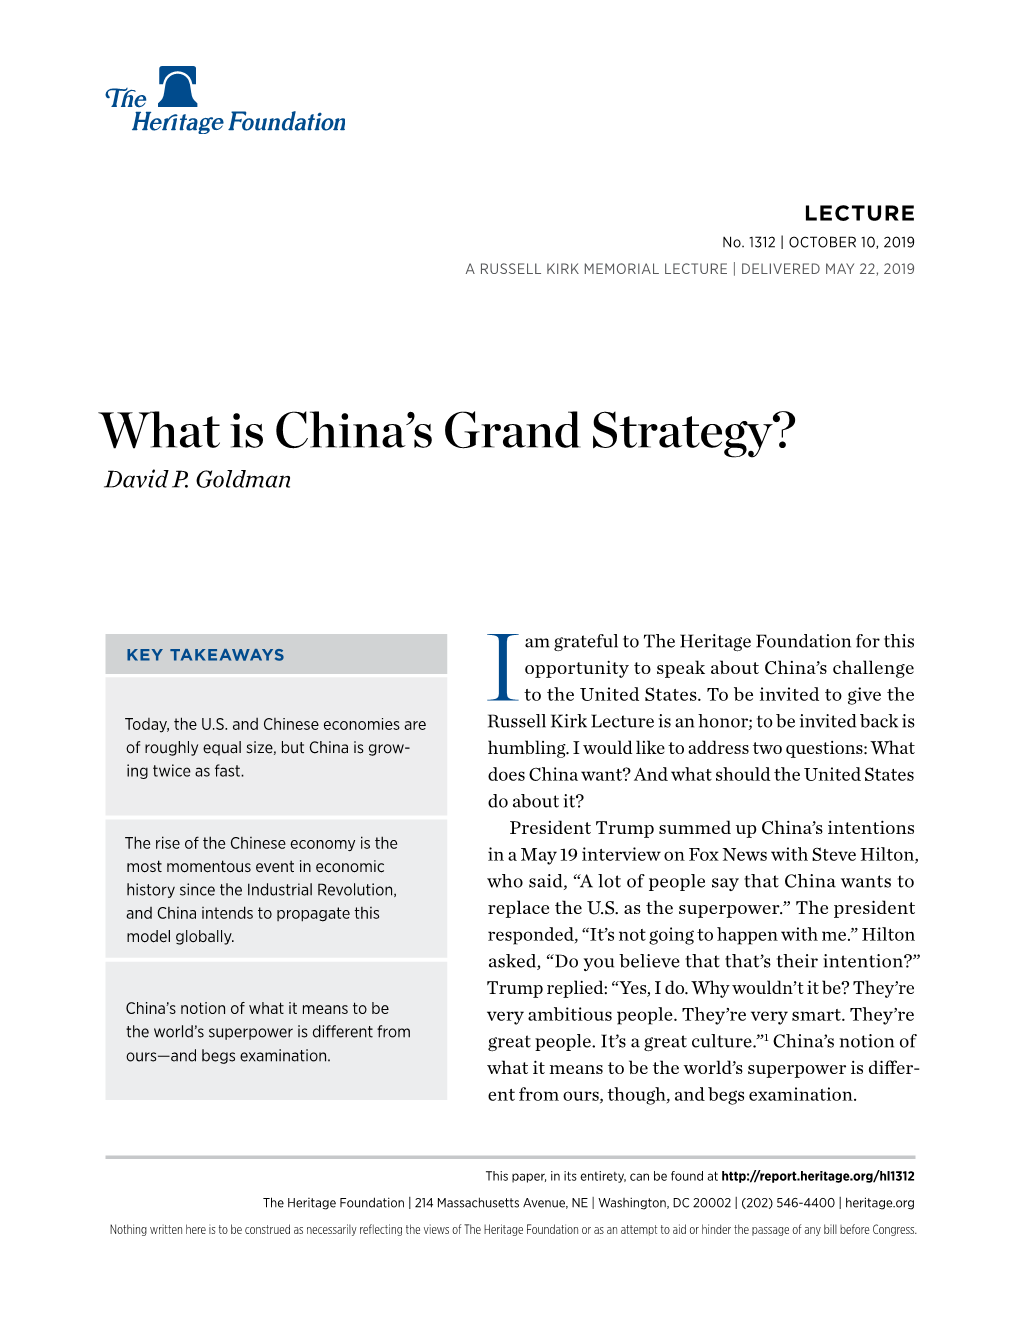 What Is China's Grand Strategy?